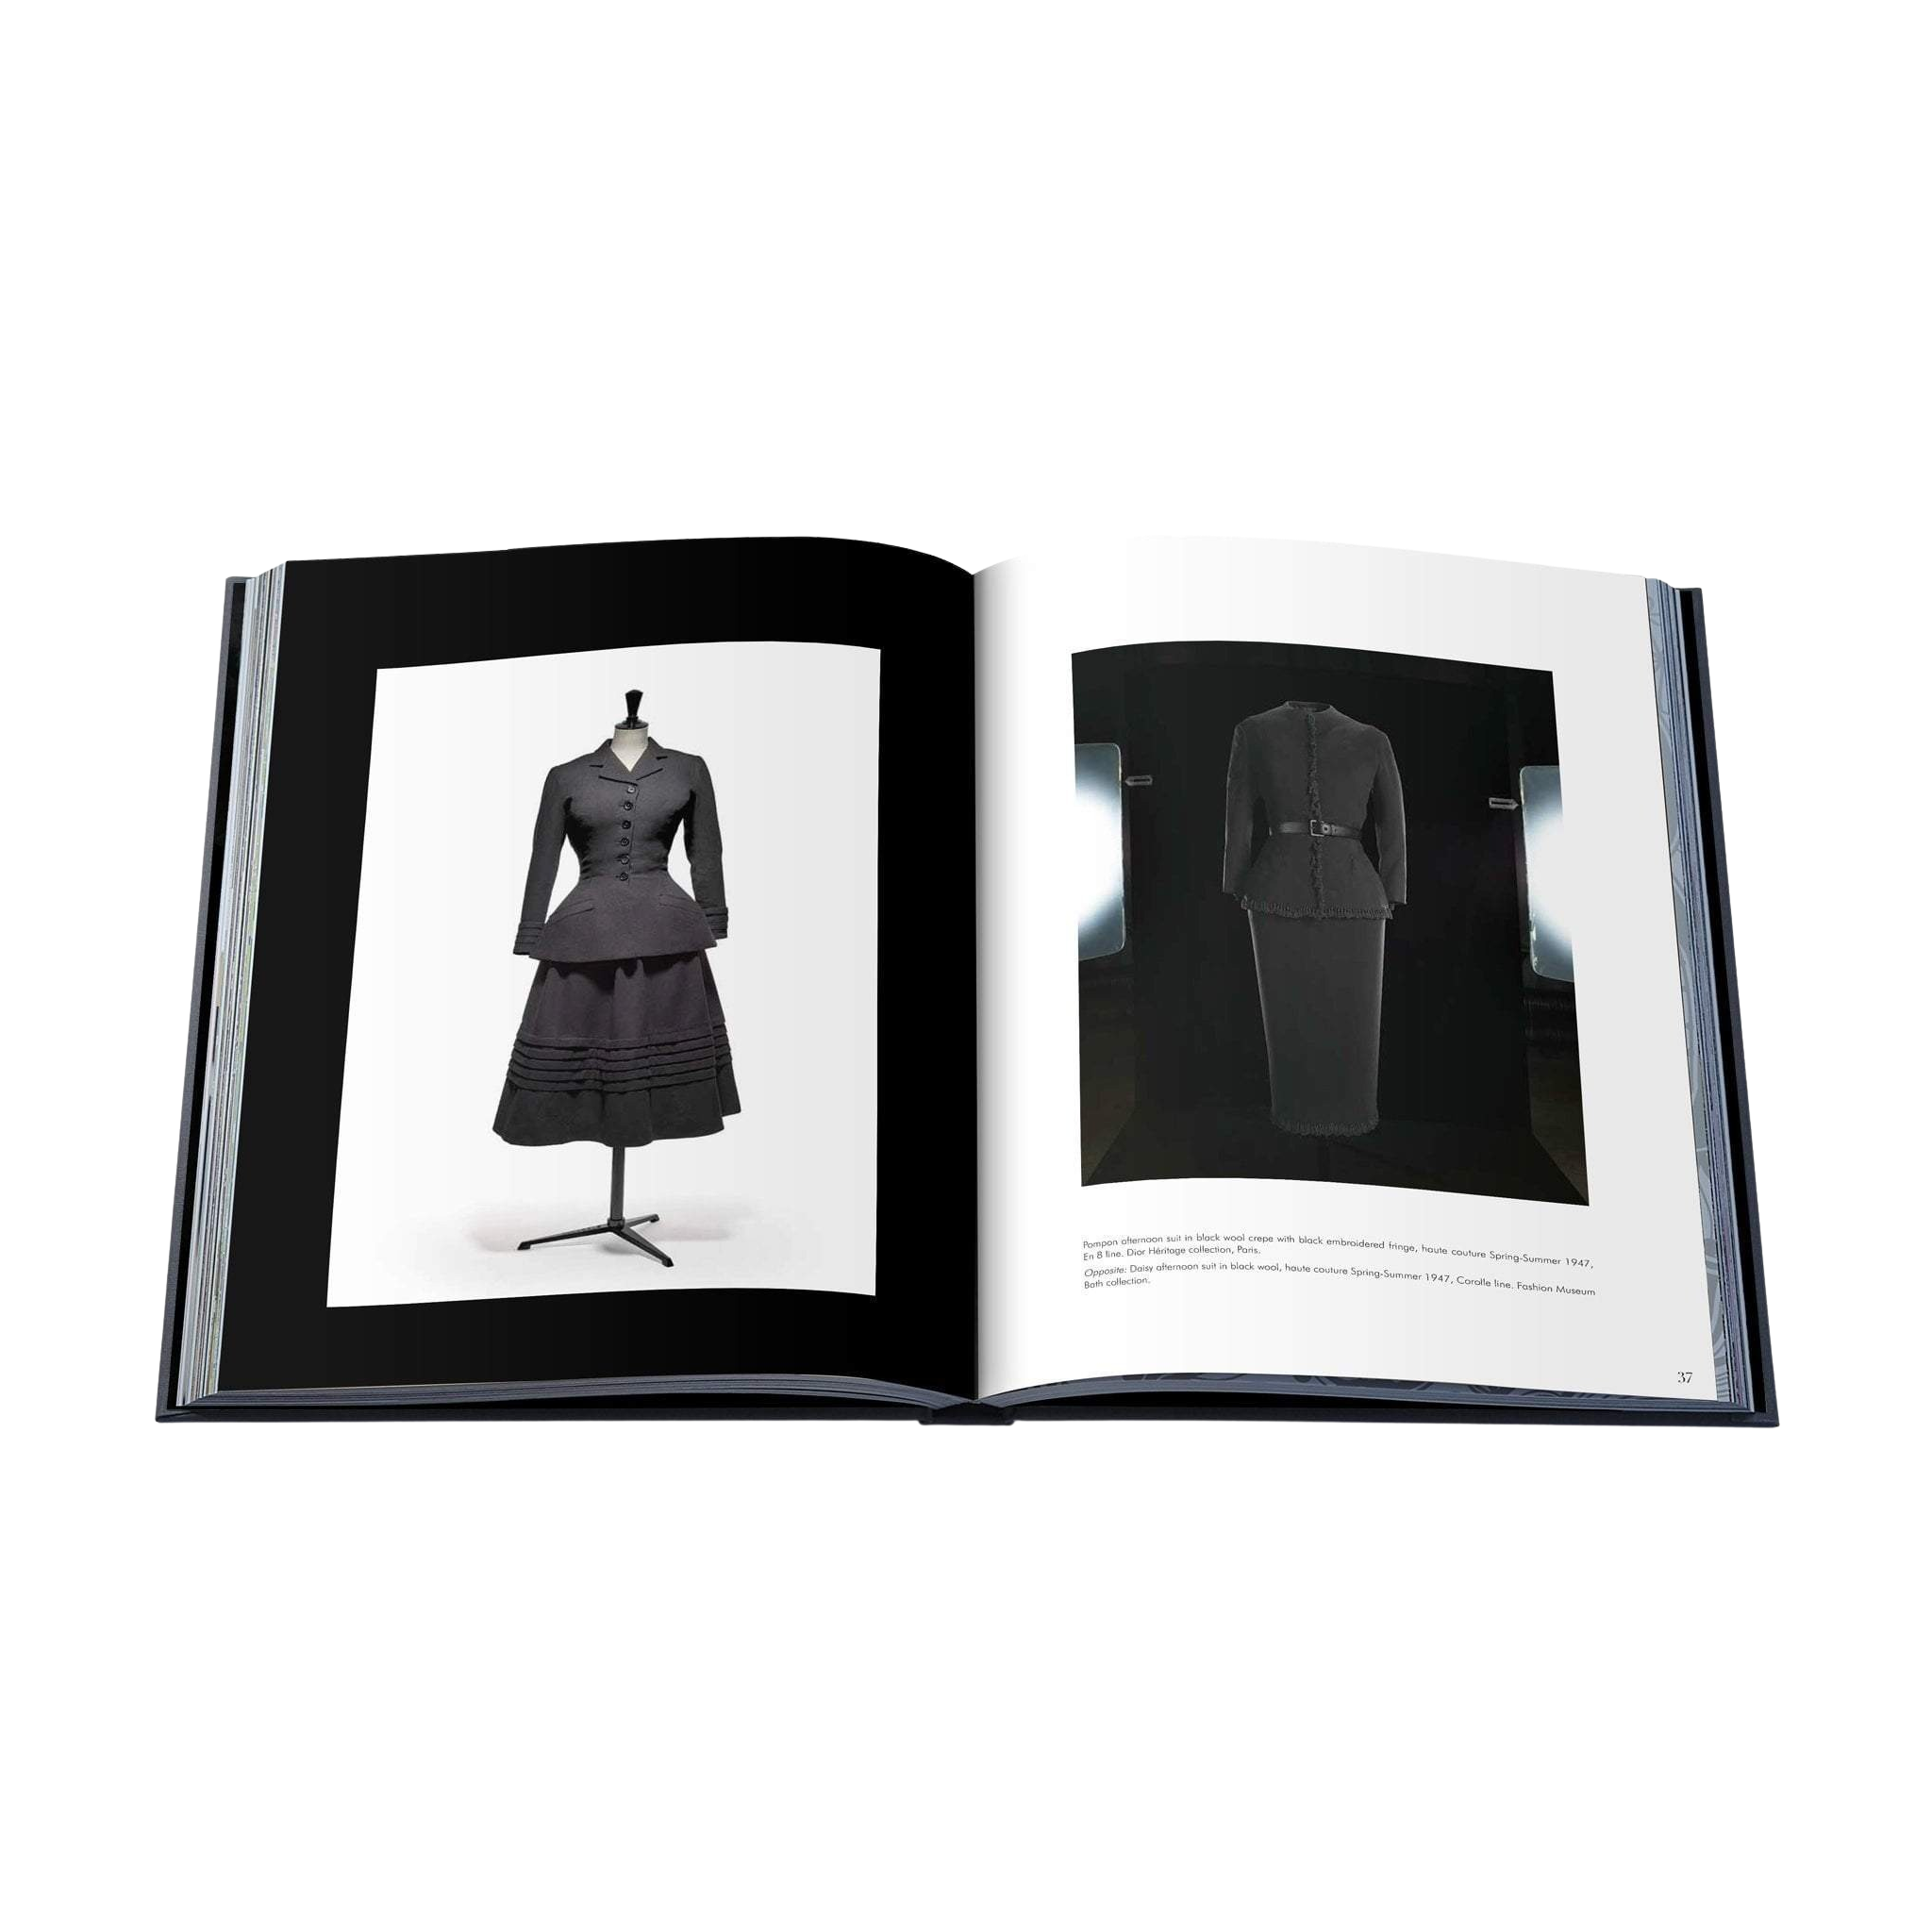 Dior in Bloom  Thames  Hudson  Coffee Table Book at The Nowhere Nation